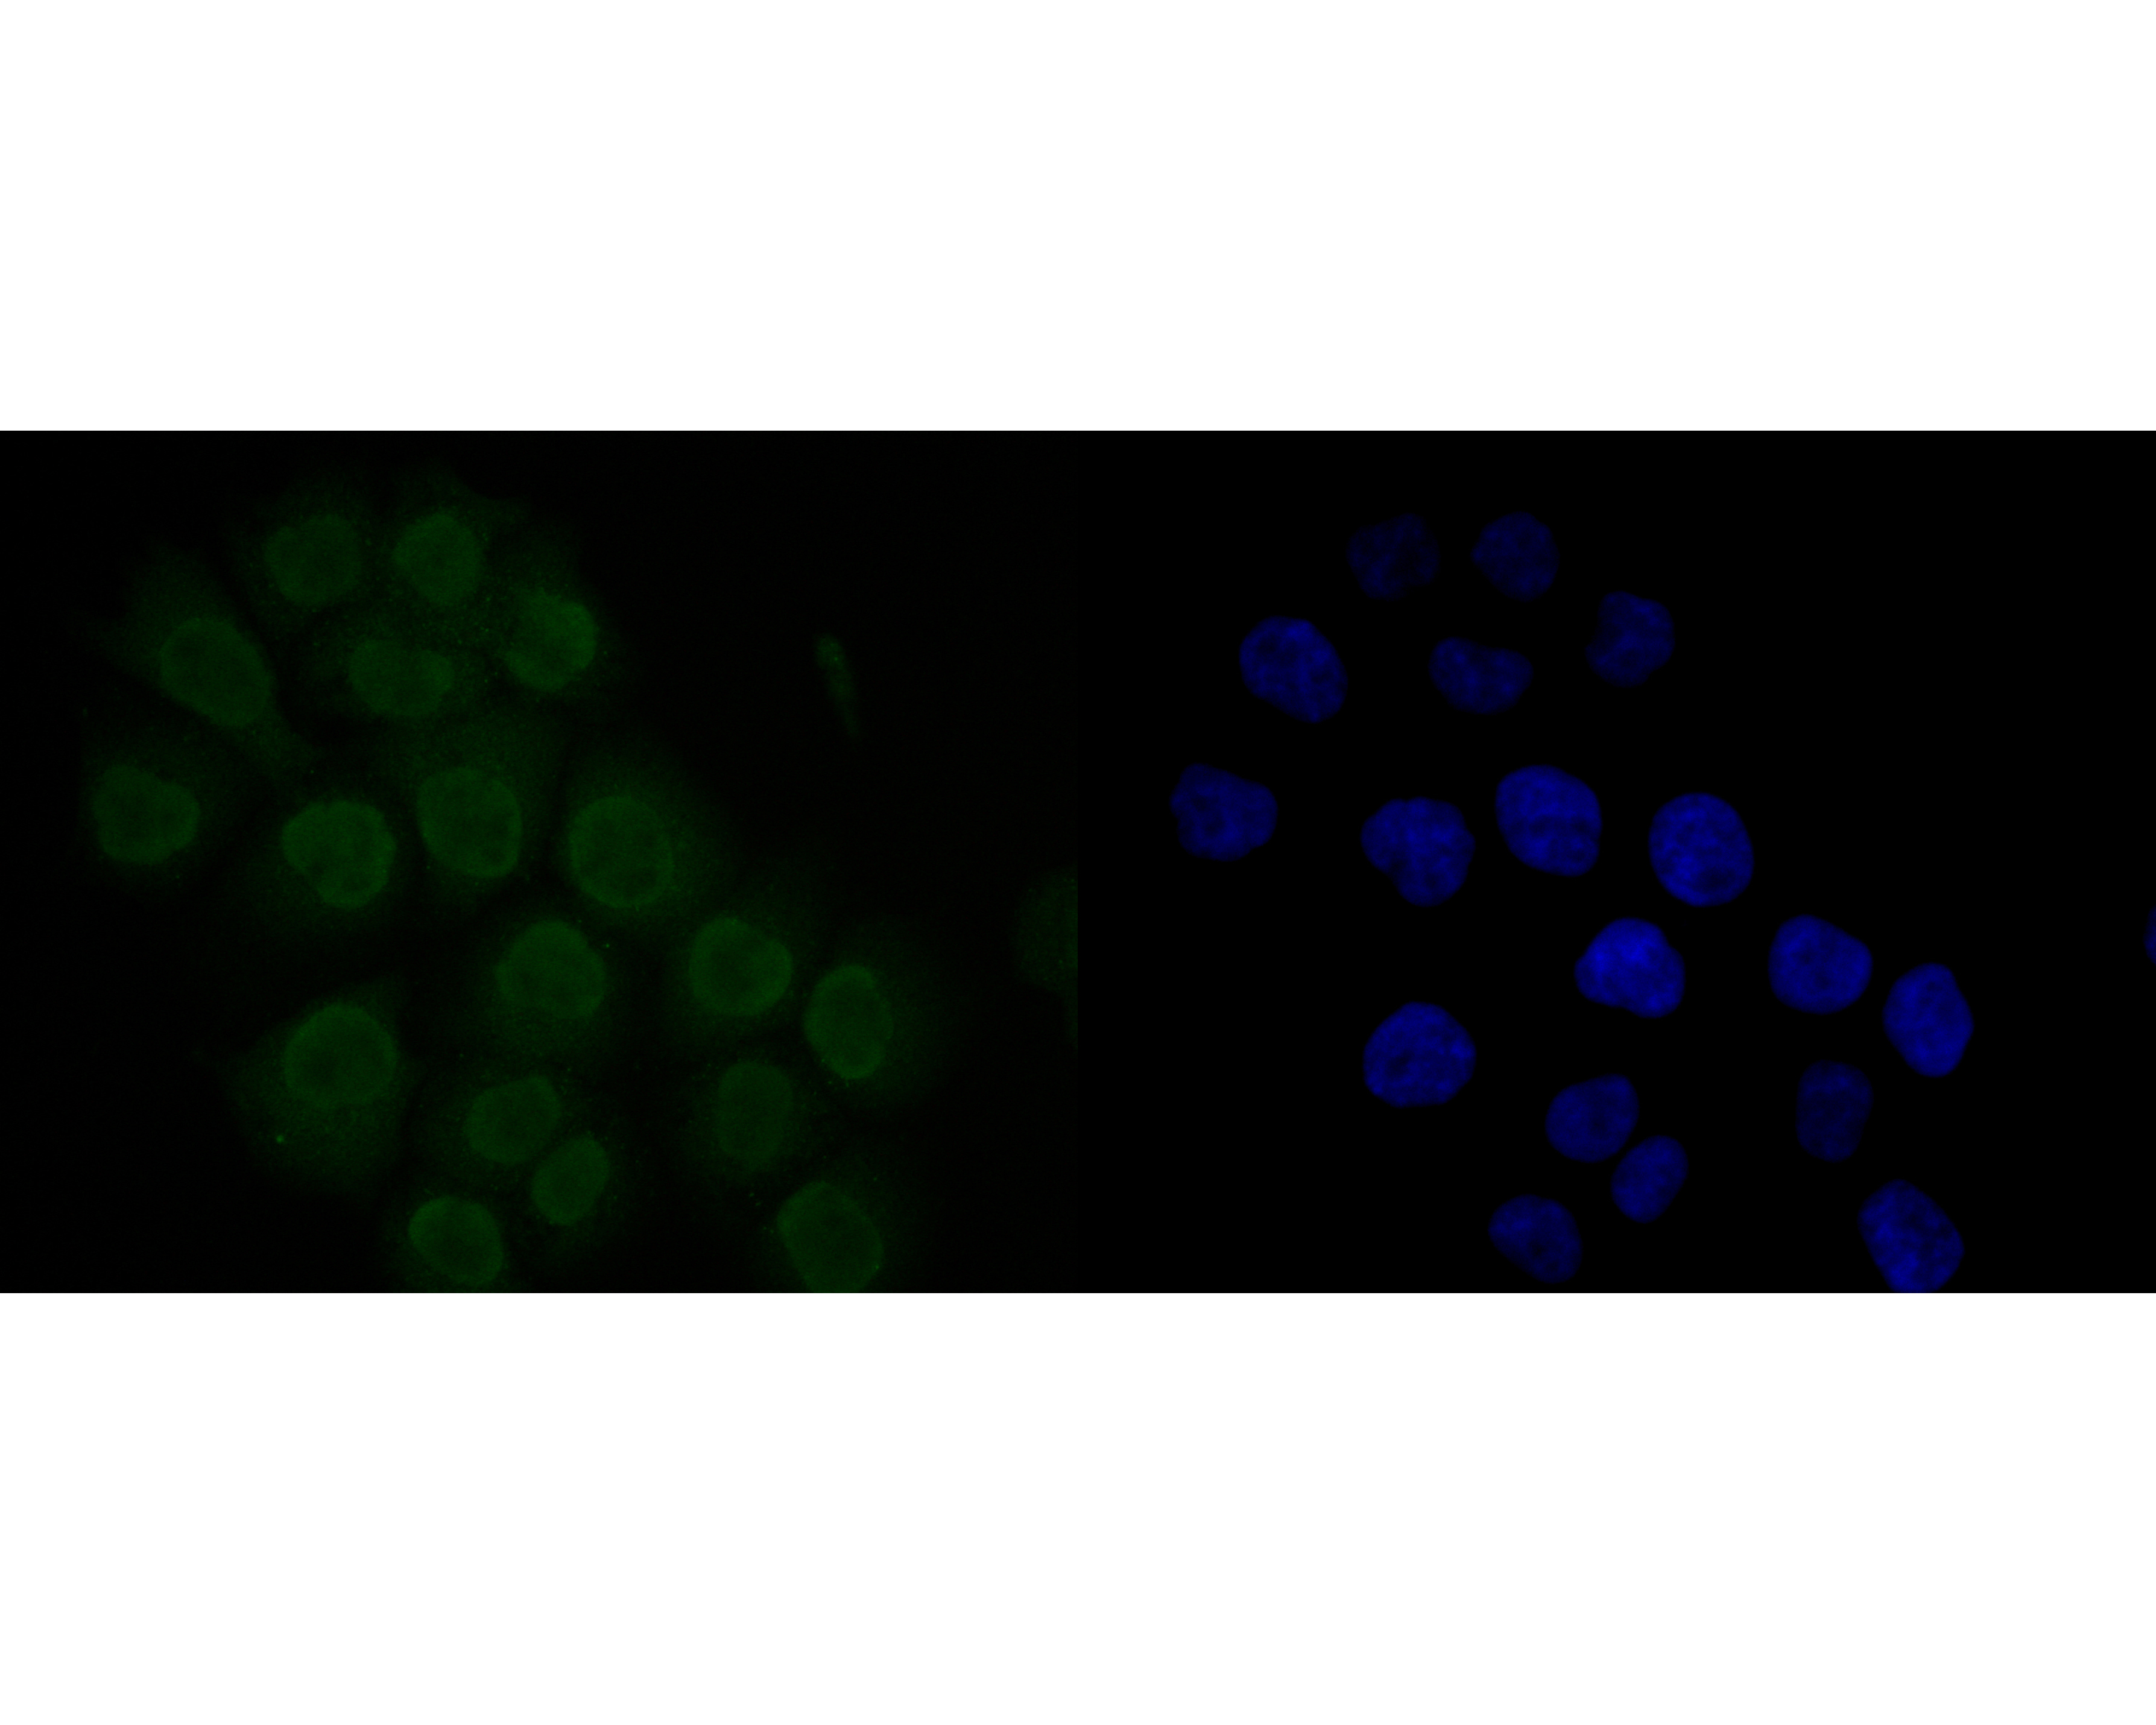 ICC staining of MDM2 in JAR cells (green). Formalin fixed cells were permeabilized with 0.1% Triton X-100 in TBS for 10 minutes at room temperature and blocked with 1% Blocker BSA for 15 minutes at room temperature. Cells were probed with the primary antibody (ER1902-14, 1/200) for 1 hour at room temperature, washed with PBS. Alexa Fluor®488 Goat anti-Rabbit IgG was used as the secondary antibody at 1/1,000 dilution. The nuclear counter stain is DAPI (blue).